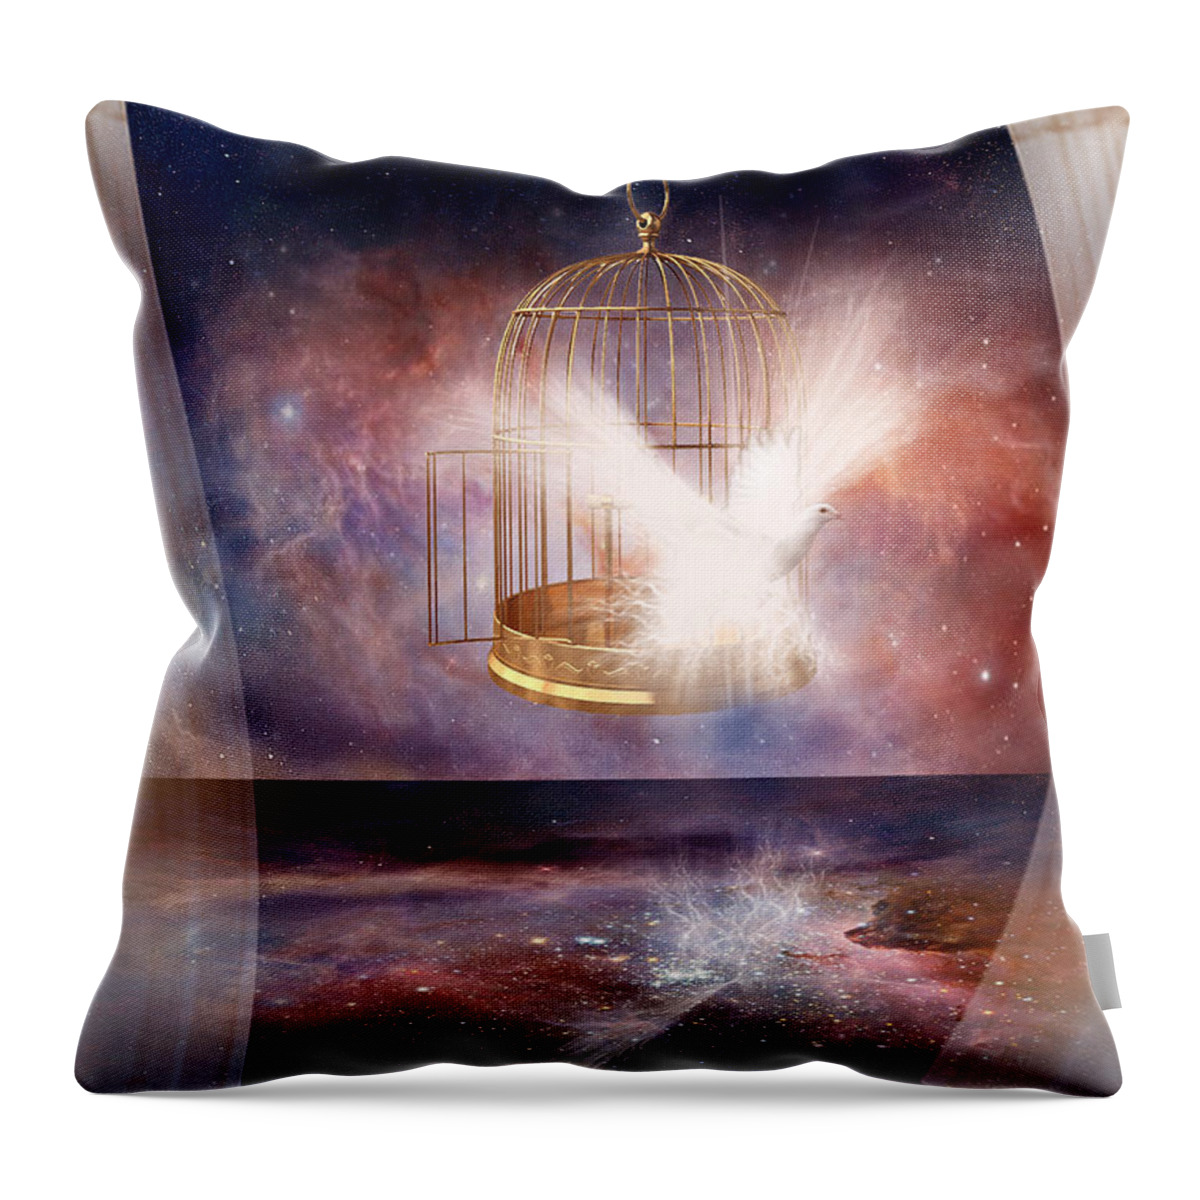 Set Free Throw Pillow featuring the digital art Set Free by Jennifer Page